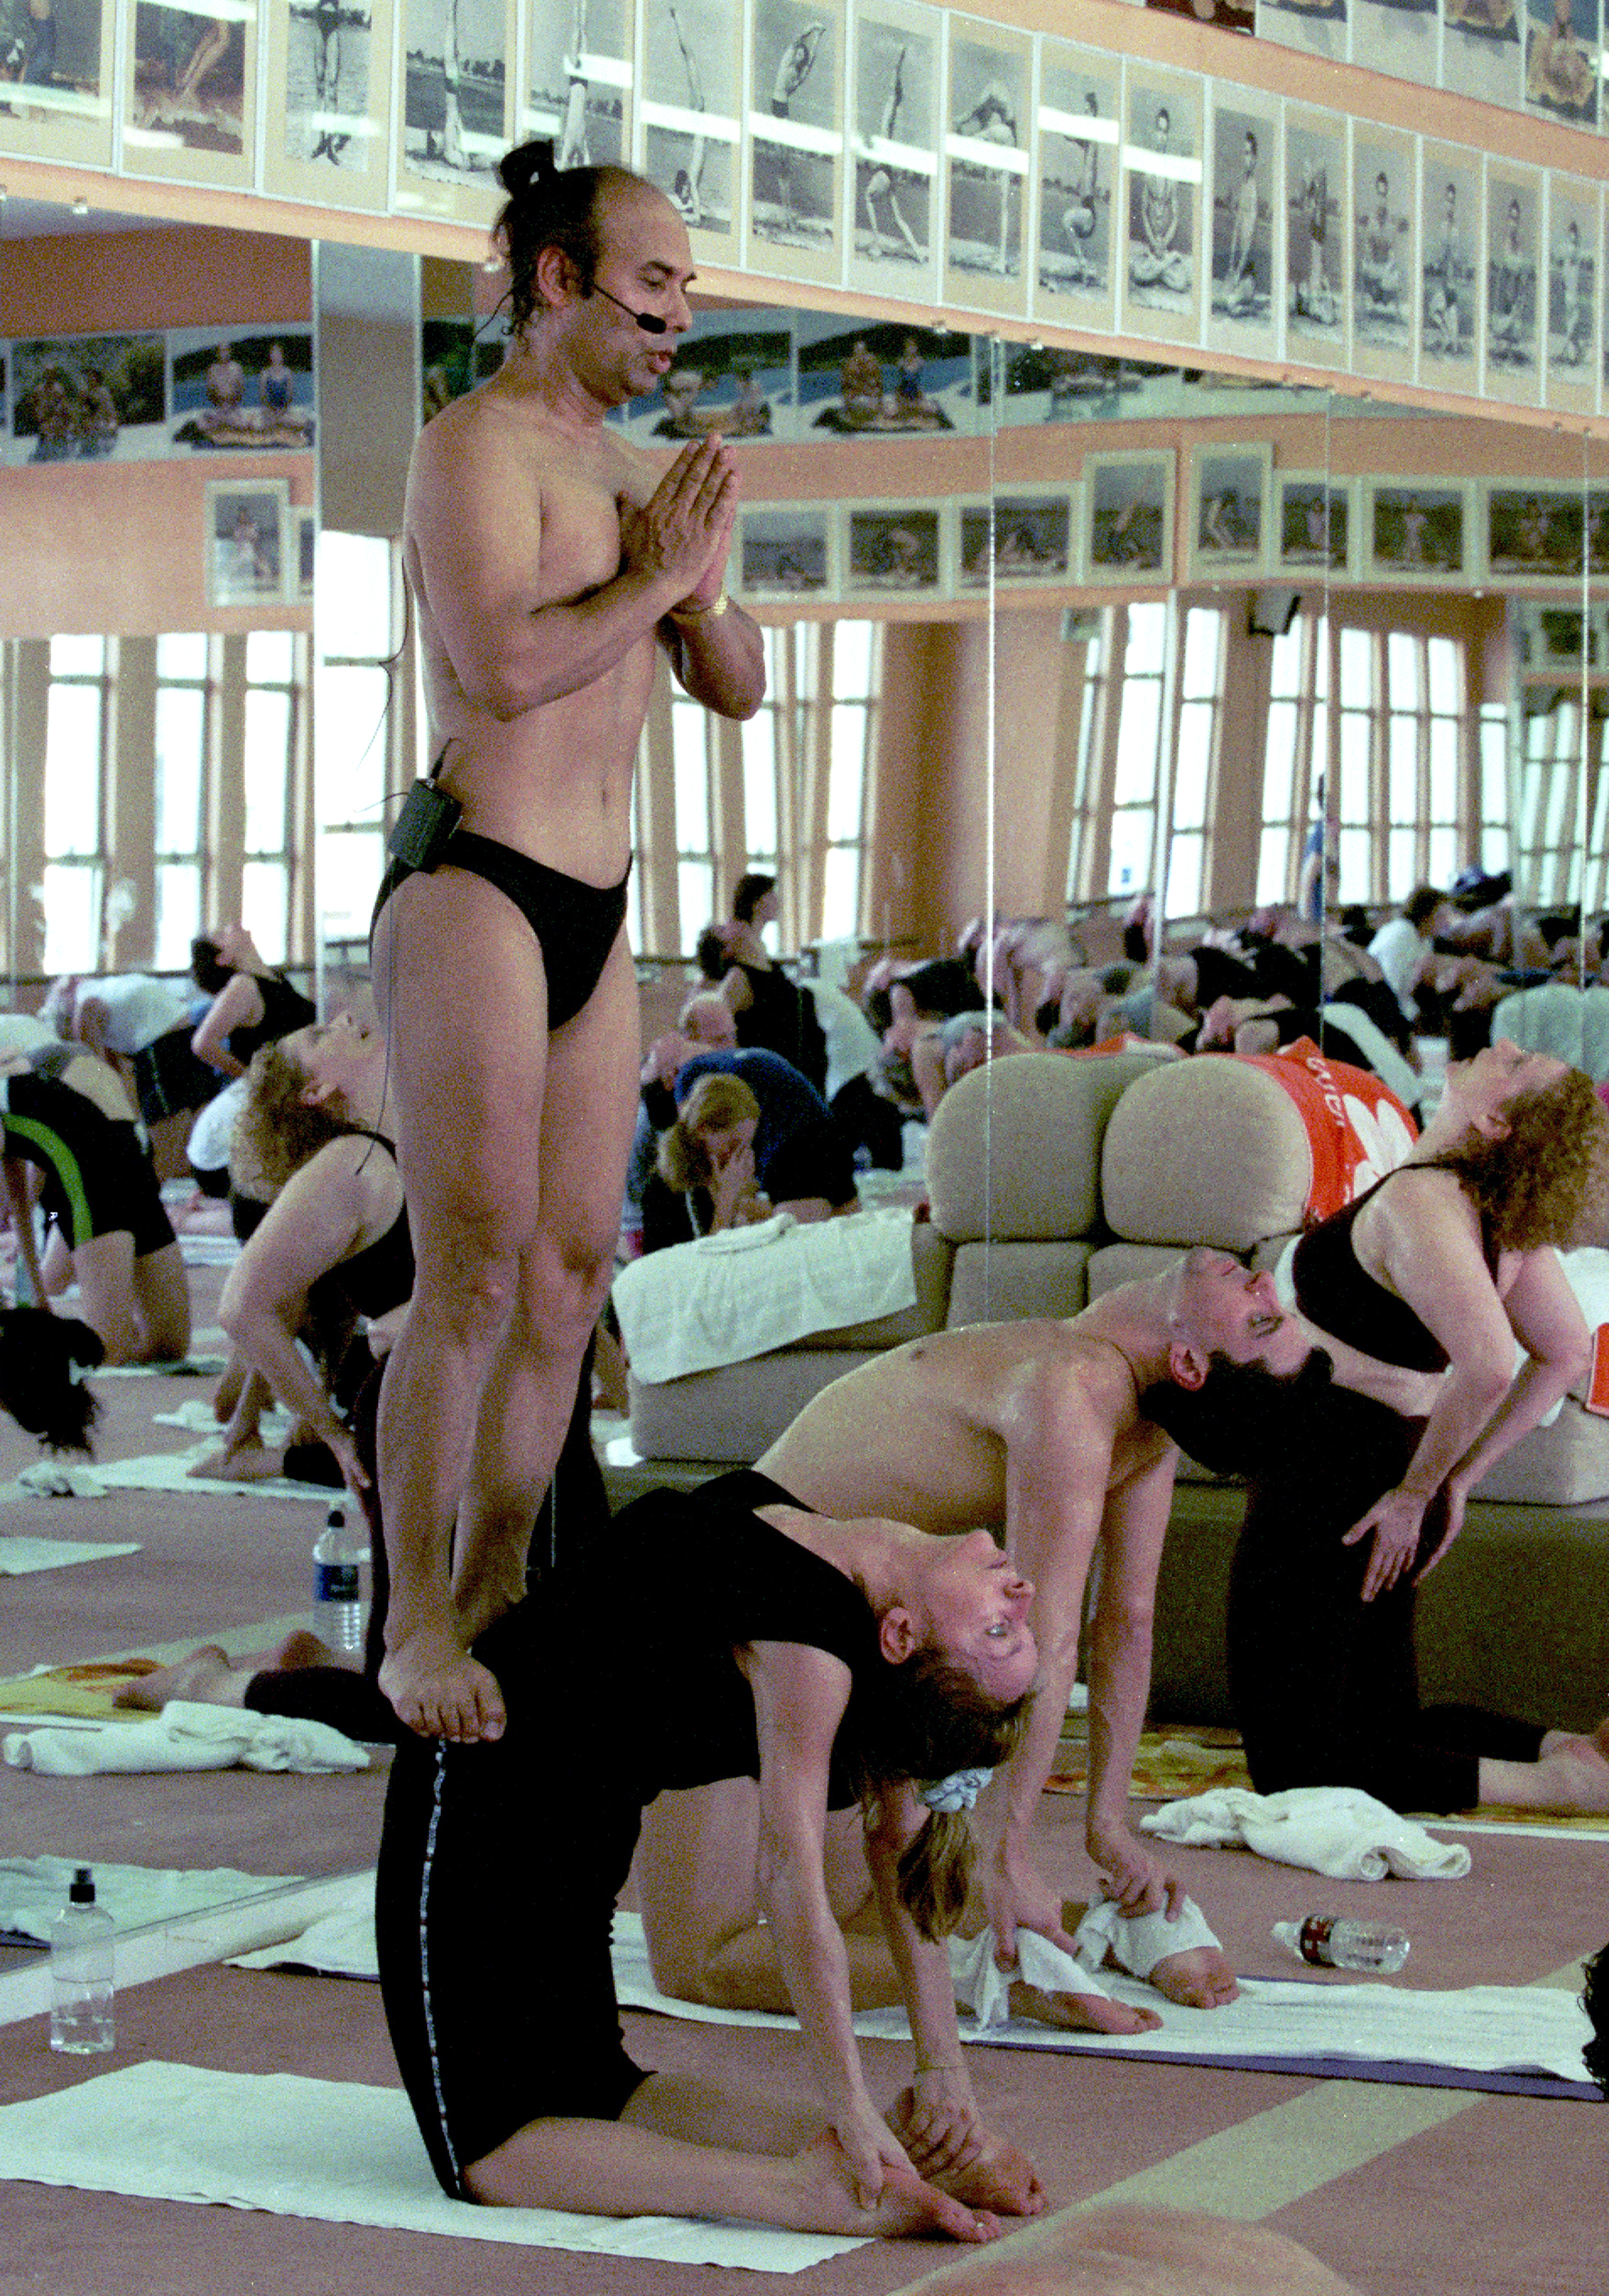 Hot Yoga Founder Bikram Choudhury Loses Lawsuit, Has to Give up His Entire  Empire